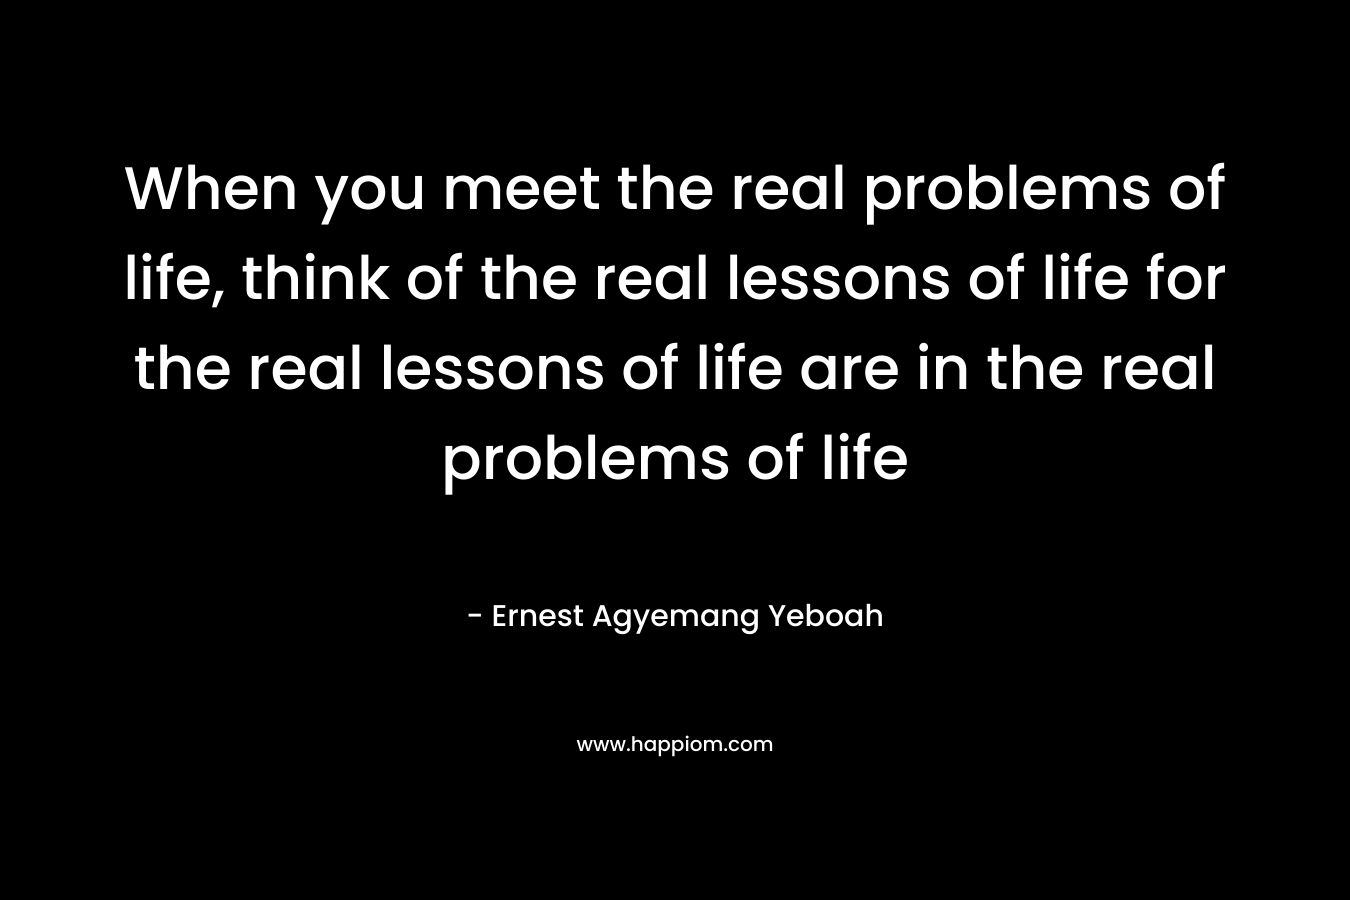 When you meet the real problems of life, think of the real lessons of life for the real lessons of life are in the real problems of life